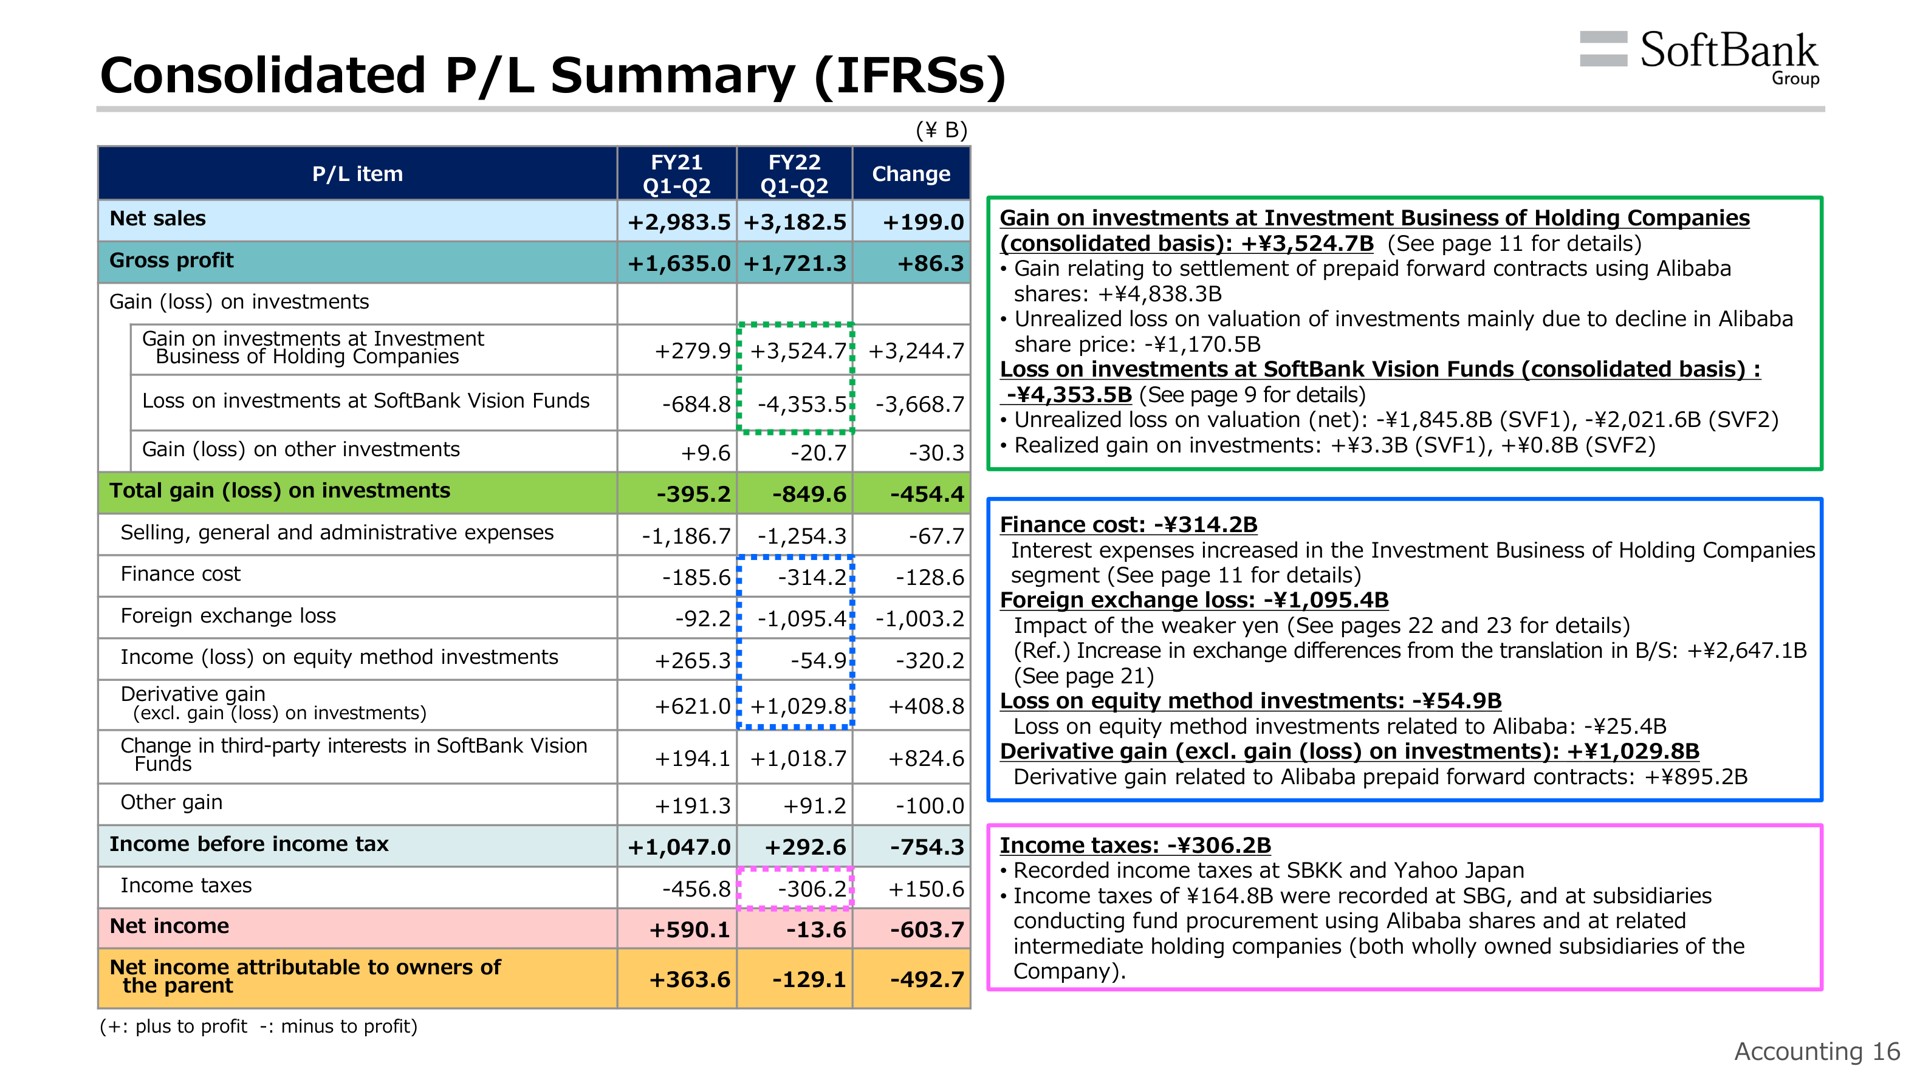 consolidated summary income taxes | SoftBank